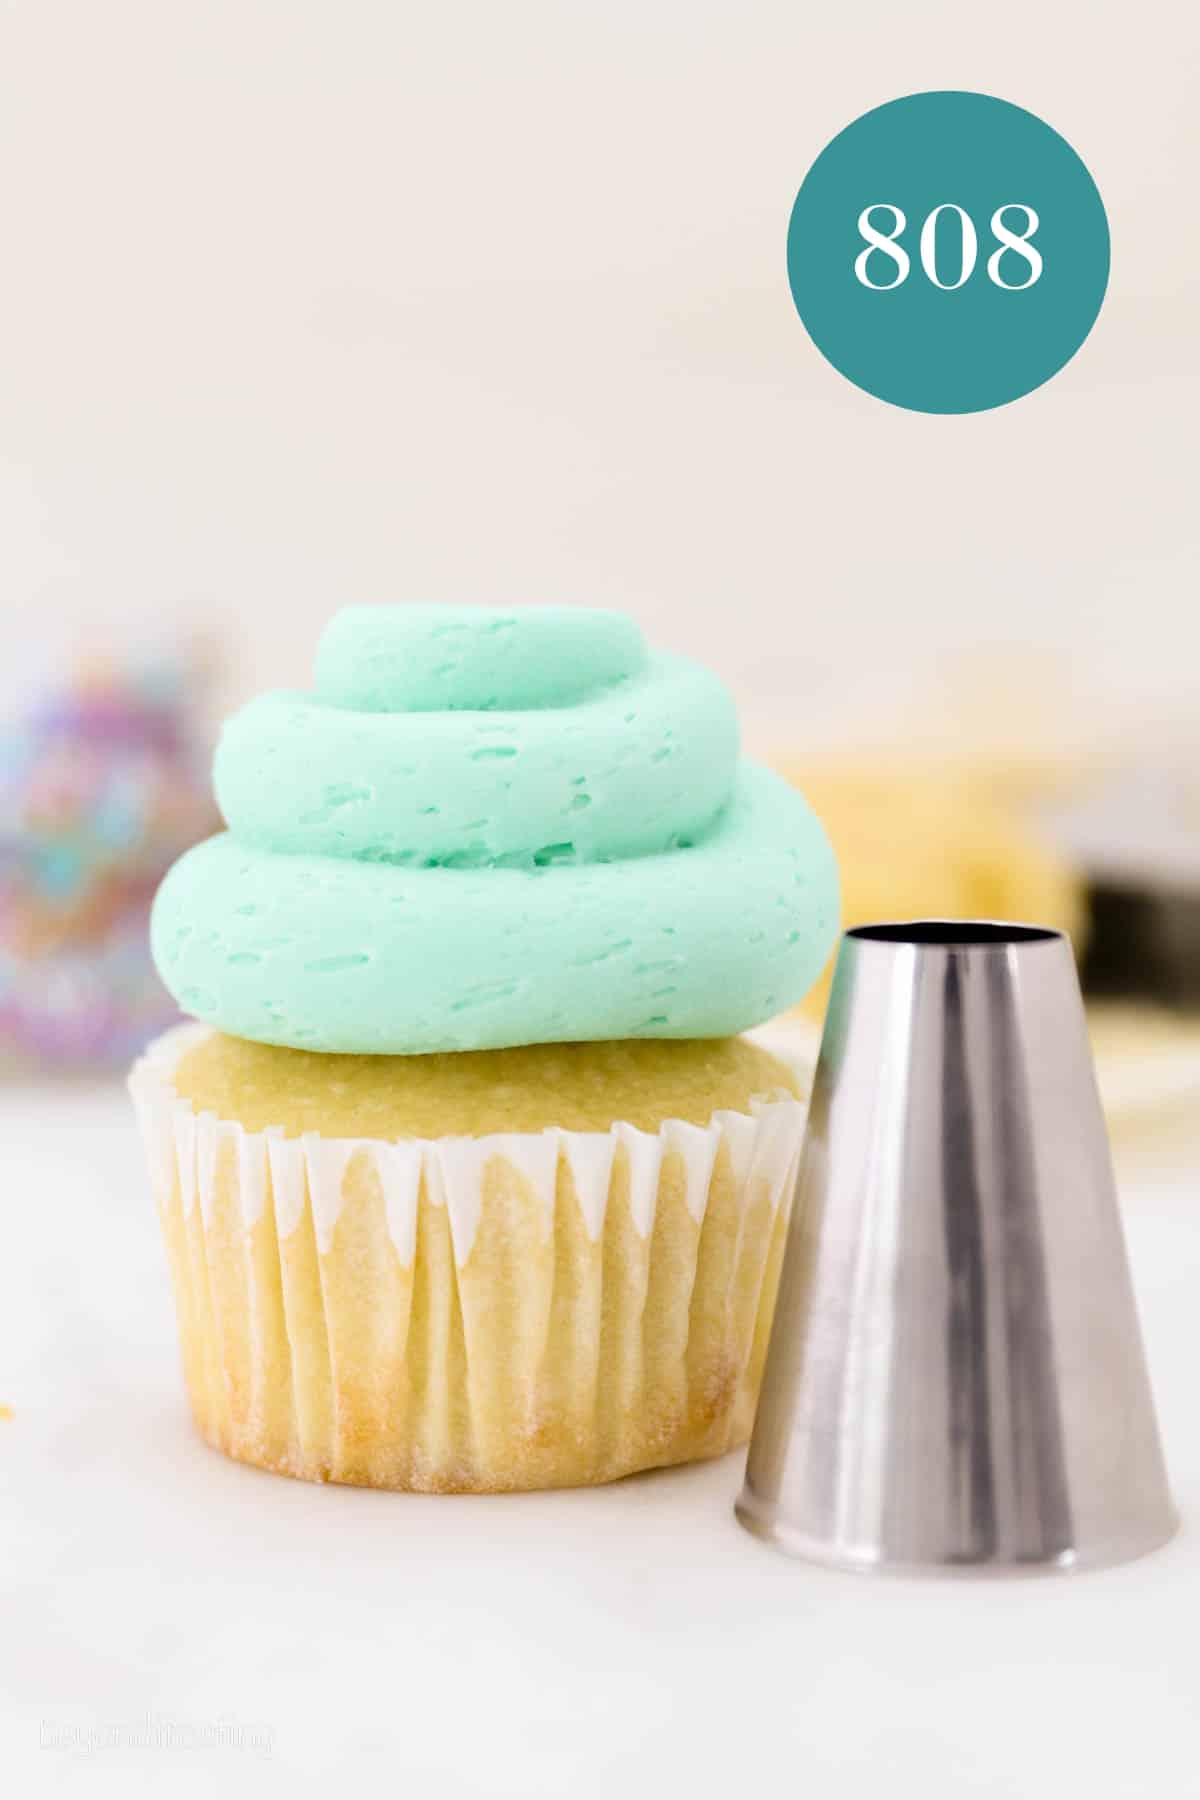 A #808 piping tip next to a frosted cupcake piped with a #808 swirl.